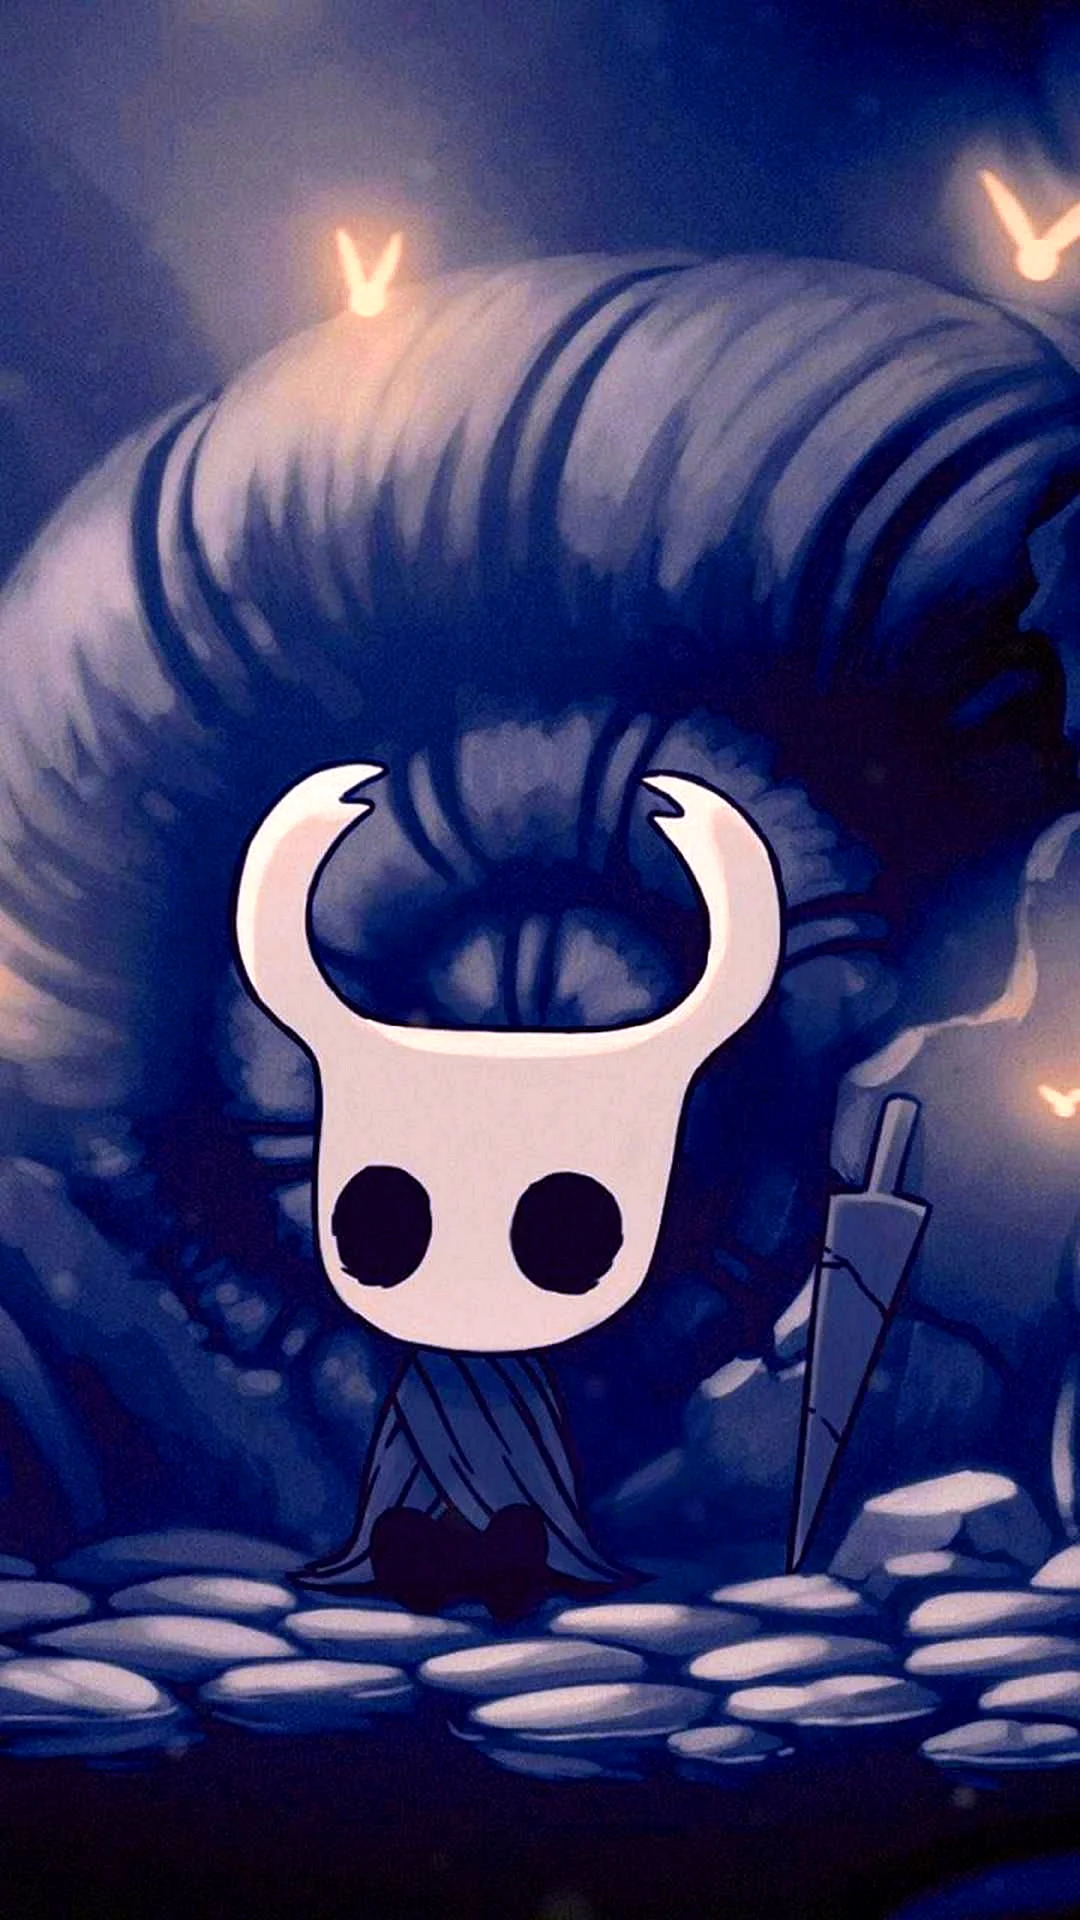 Download Hollow Knight 4к Wallpaper For iPhone - WallpapersHigh